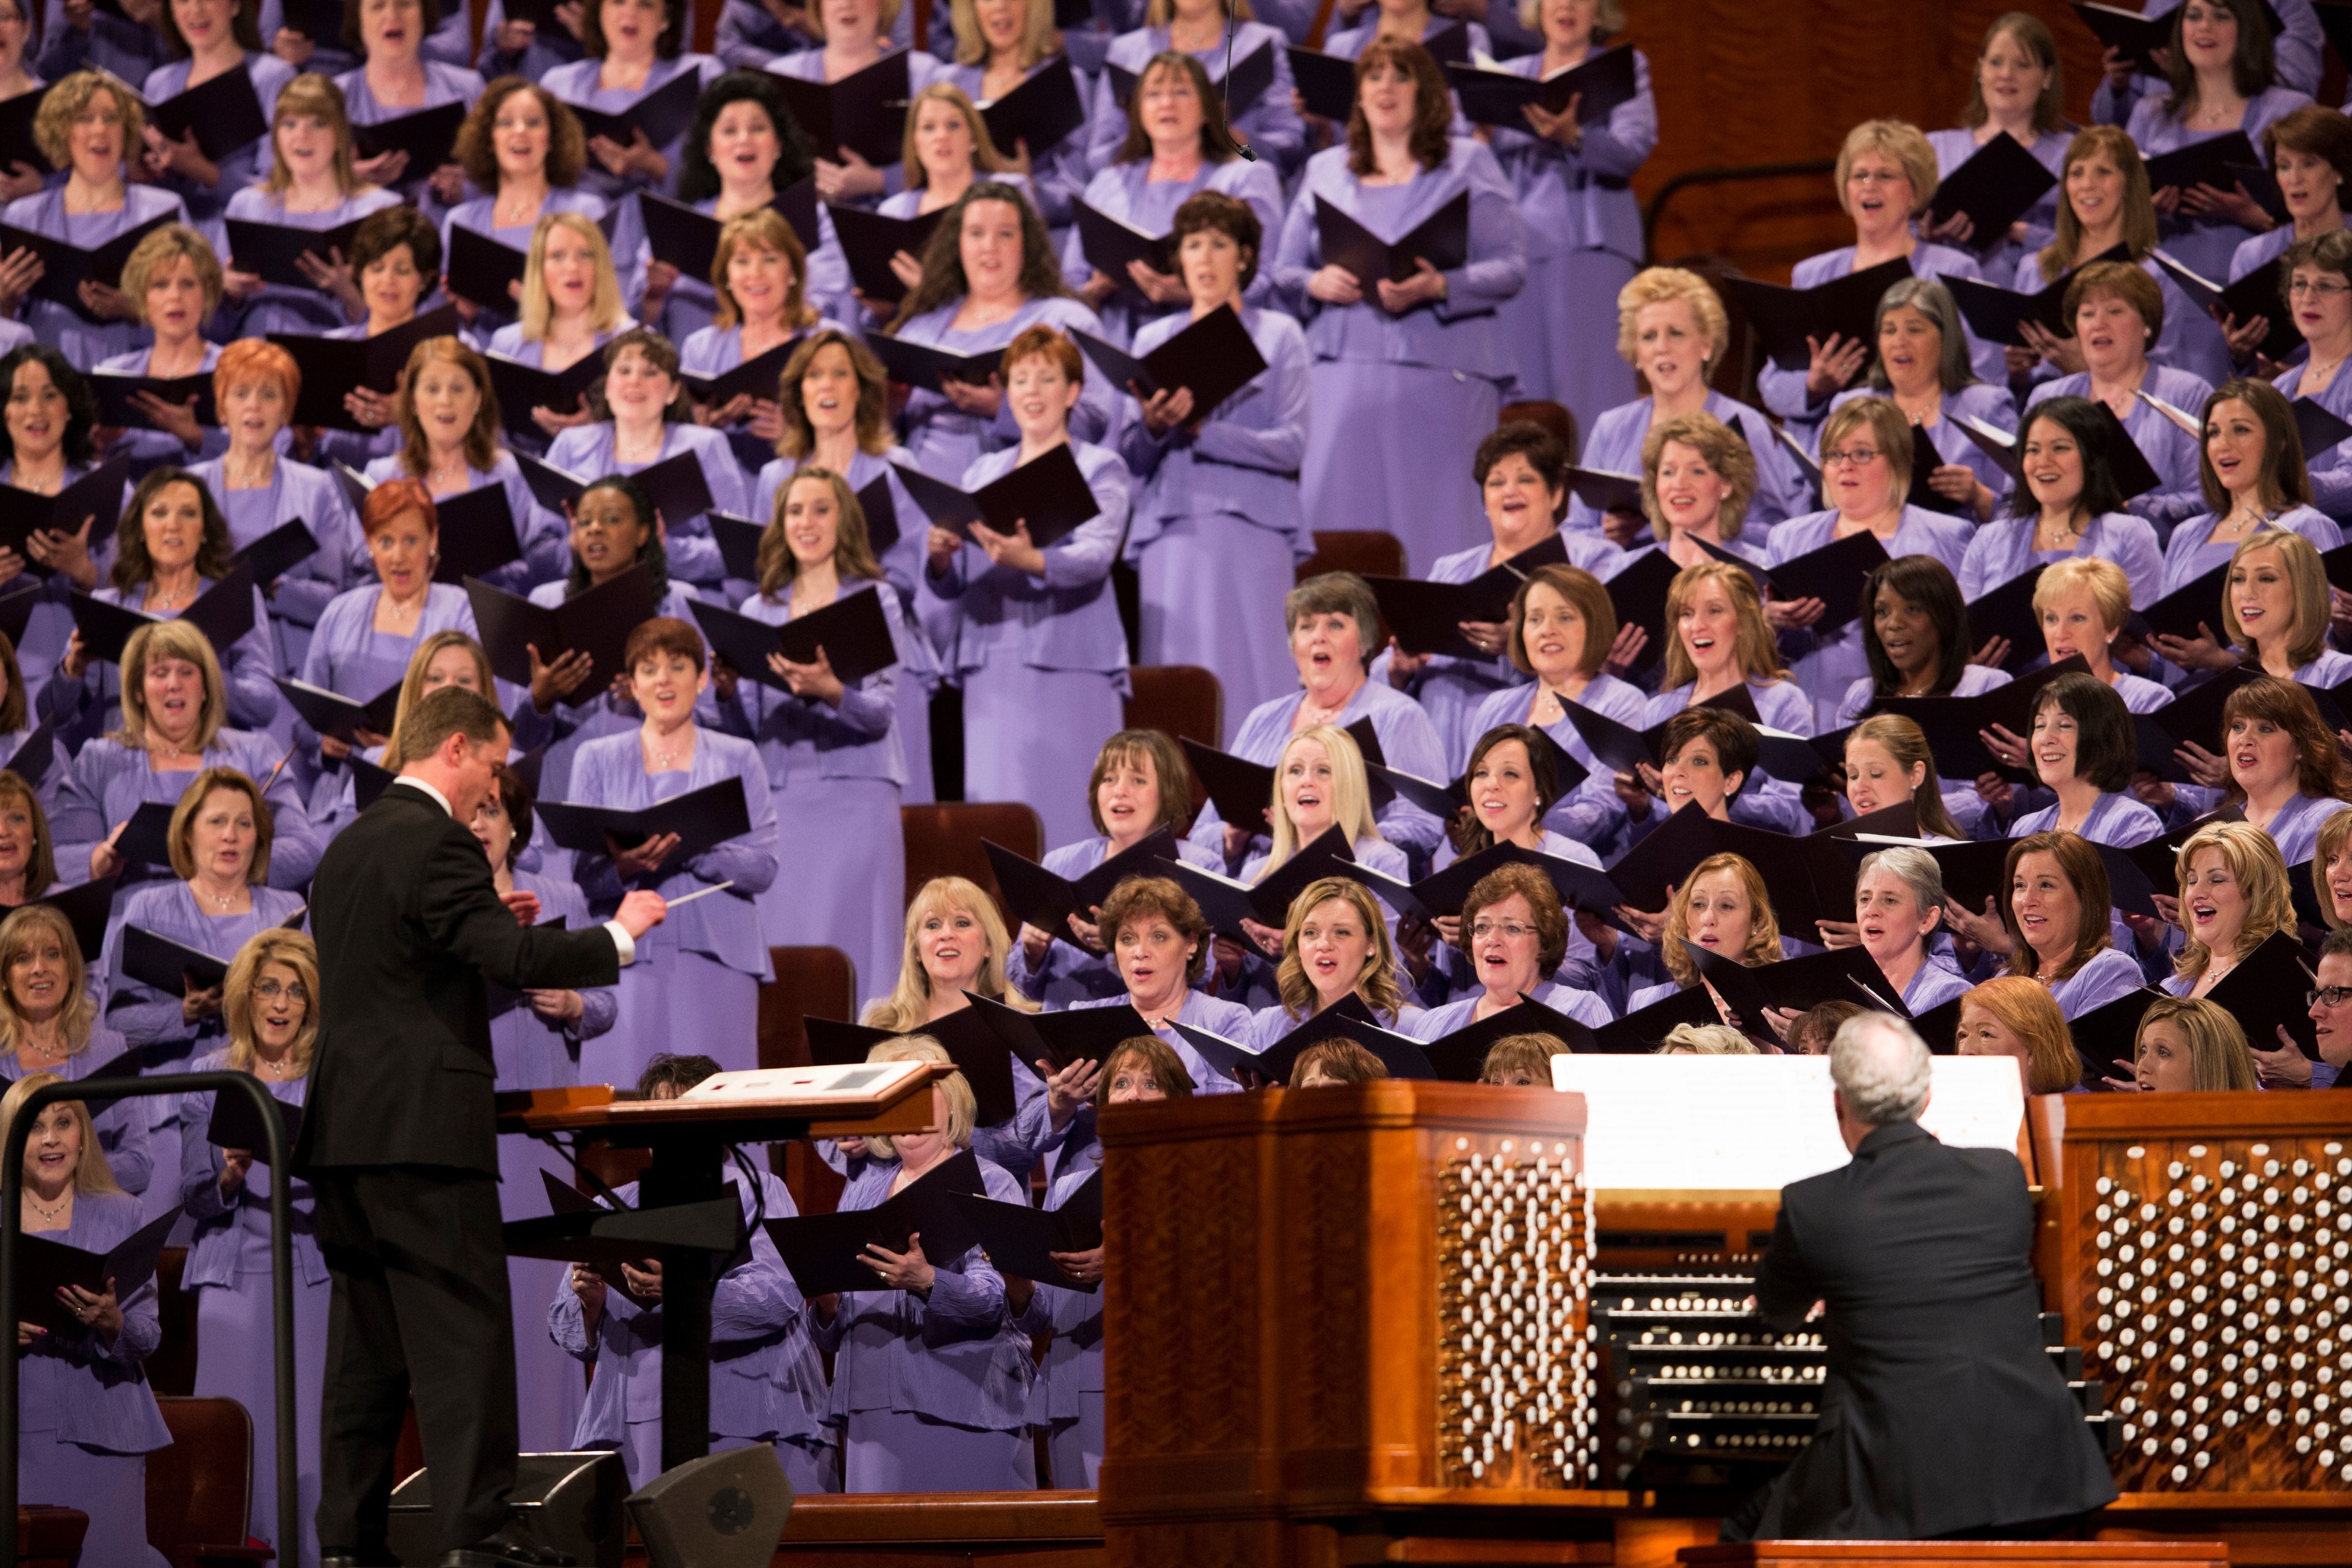 Ryan Murphy stands on the stage of the Conference Center to conduct the choir at the April 2013 general conference.  